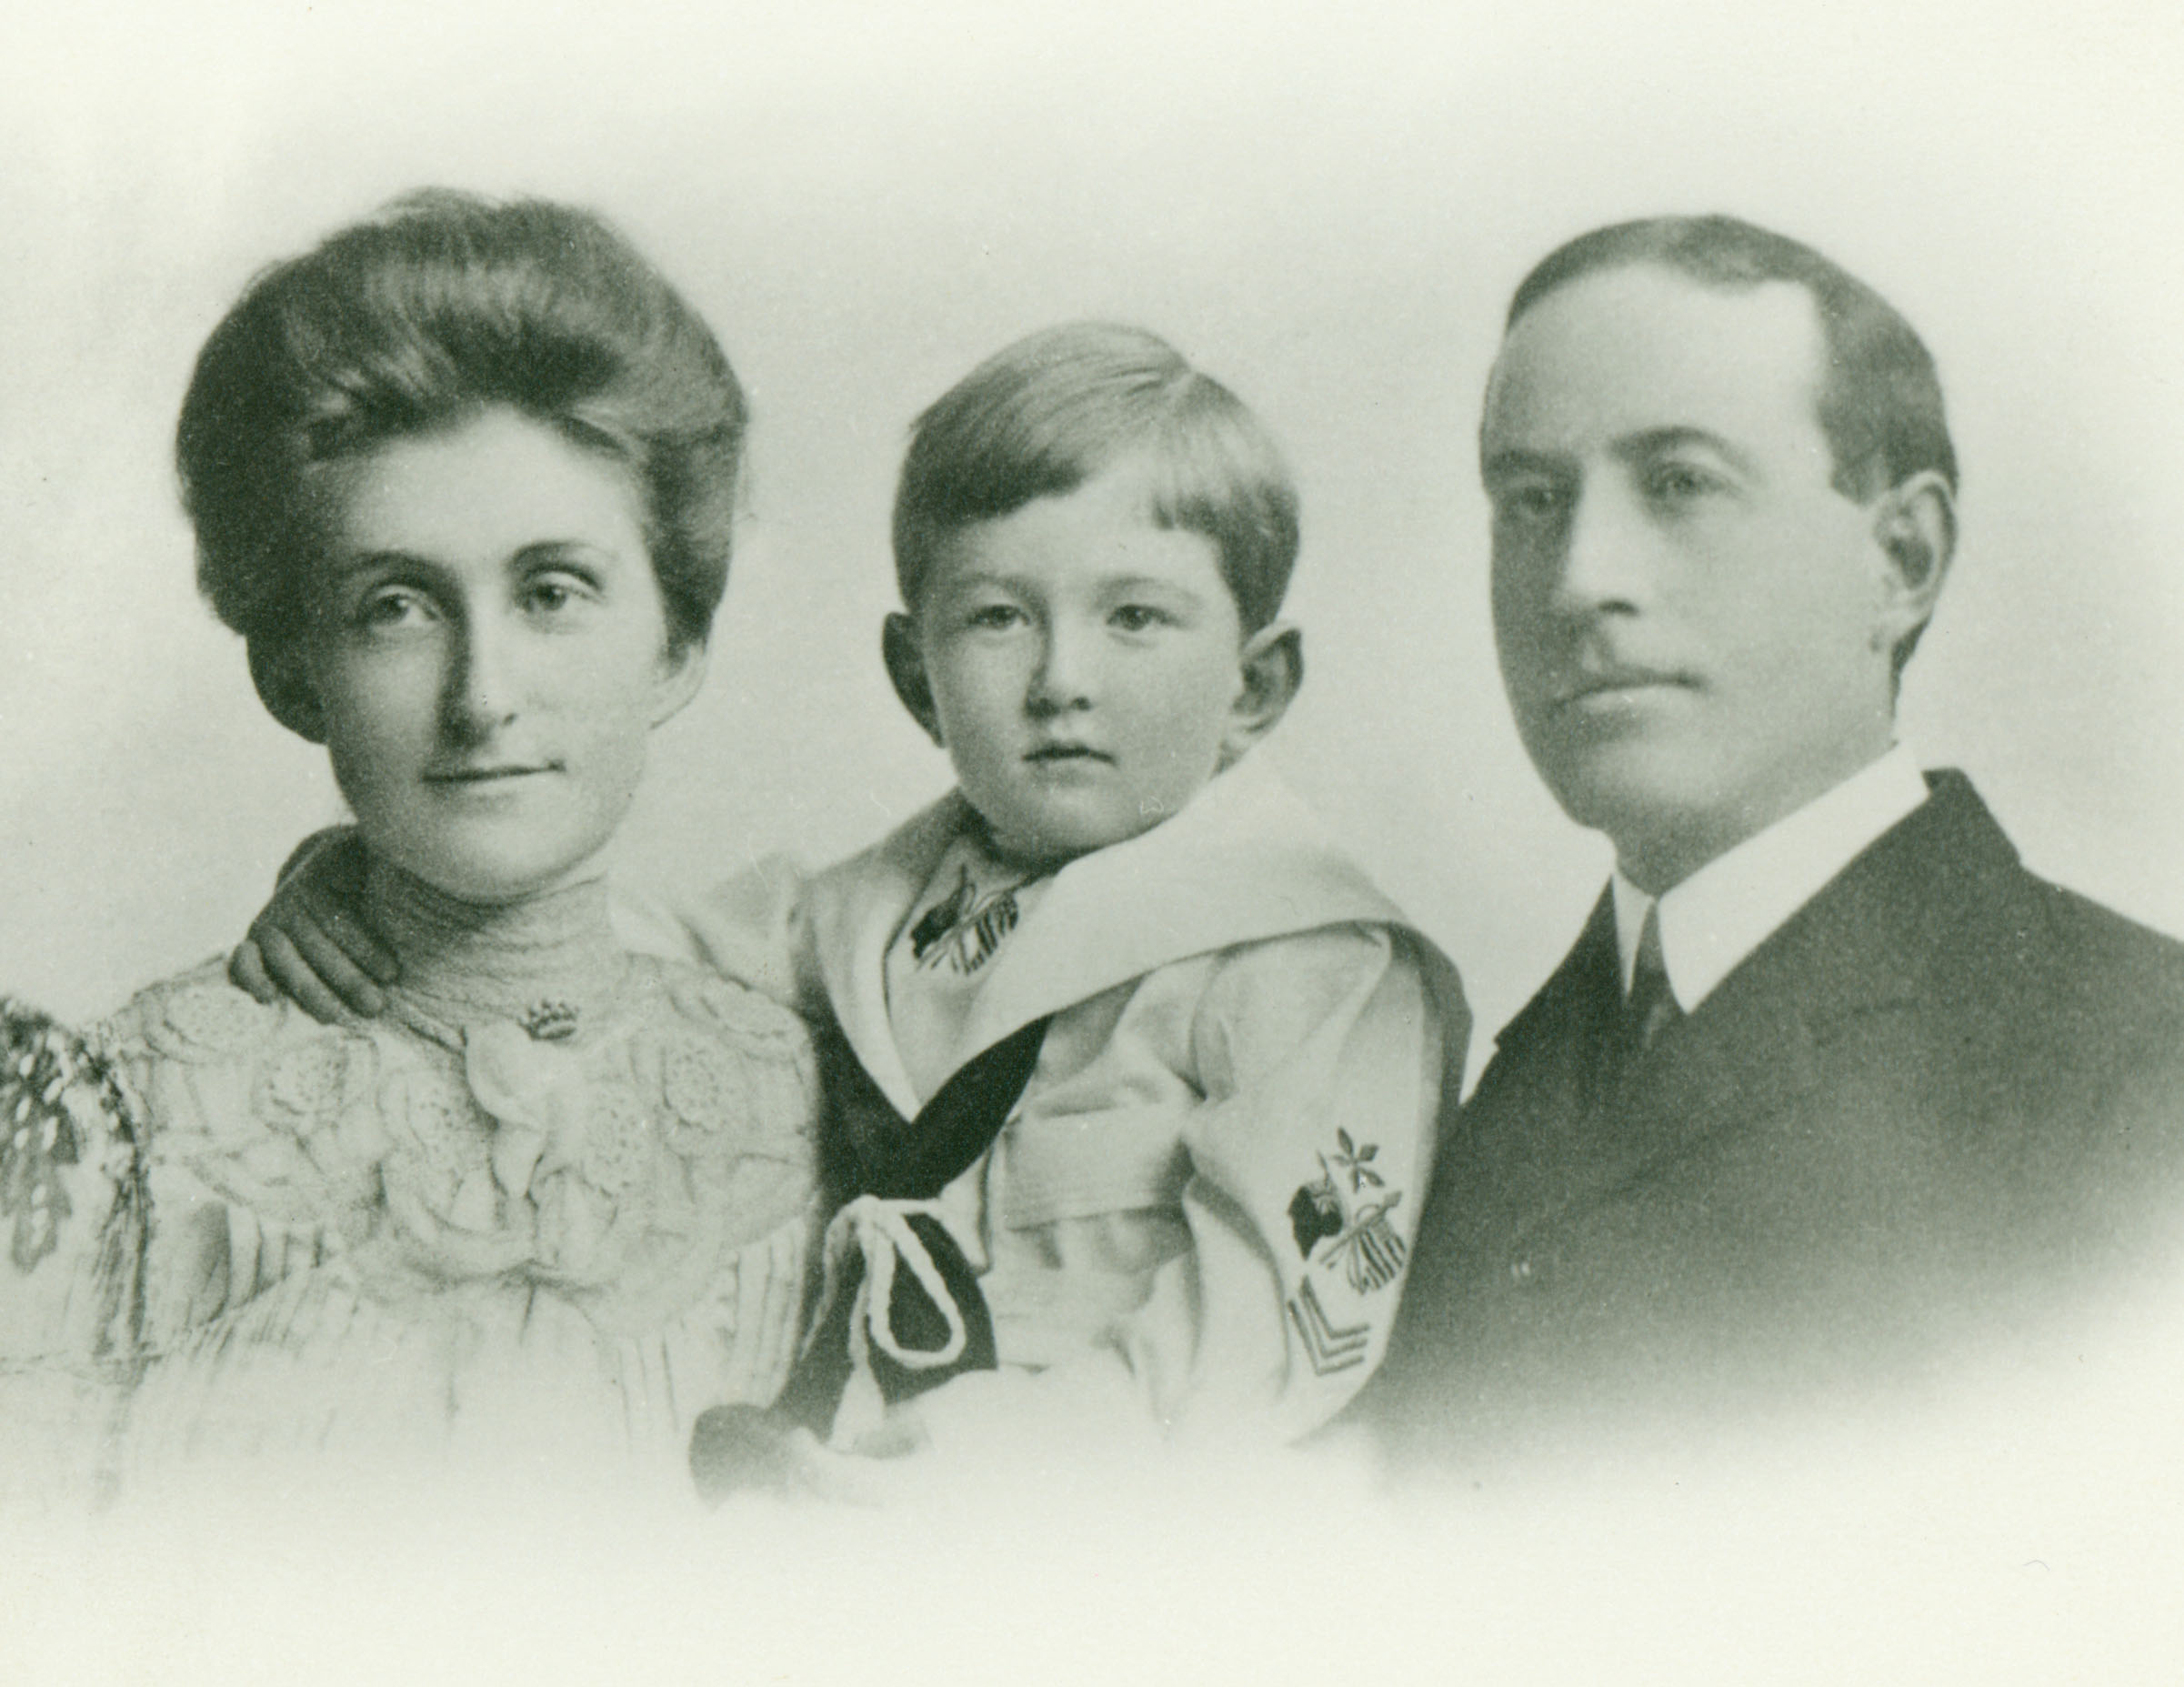 Family portrait of a woman holding a young boy standing next to a man in a suit.